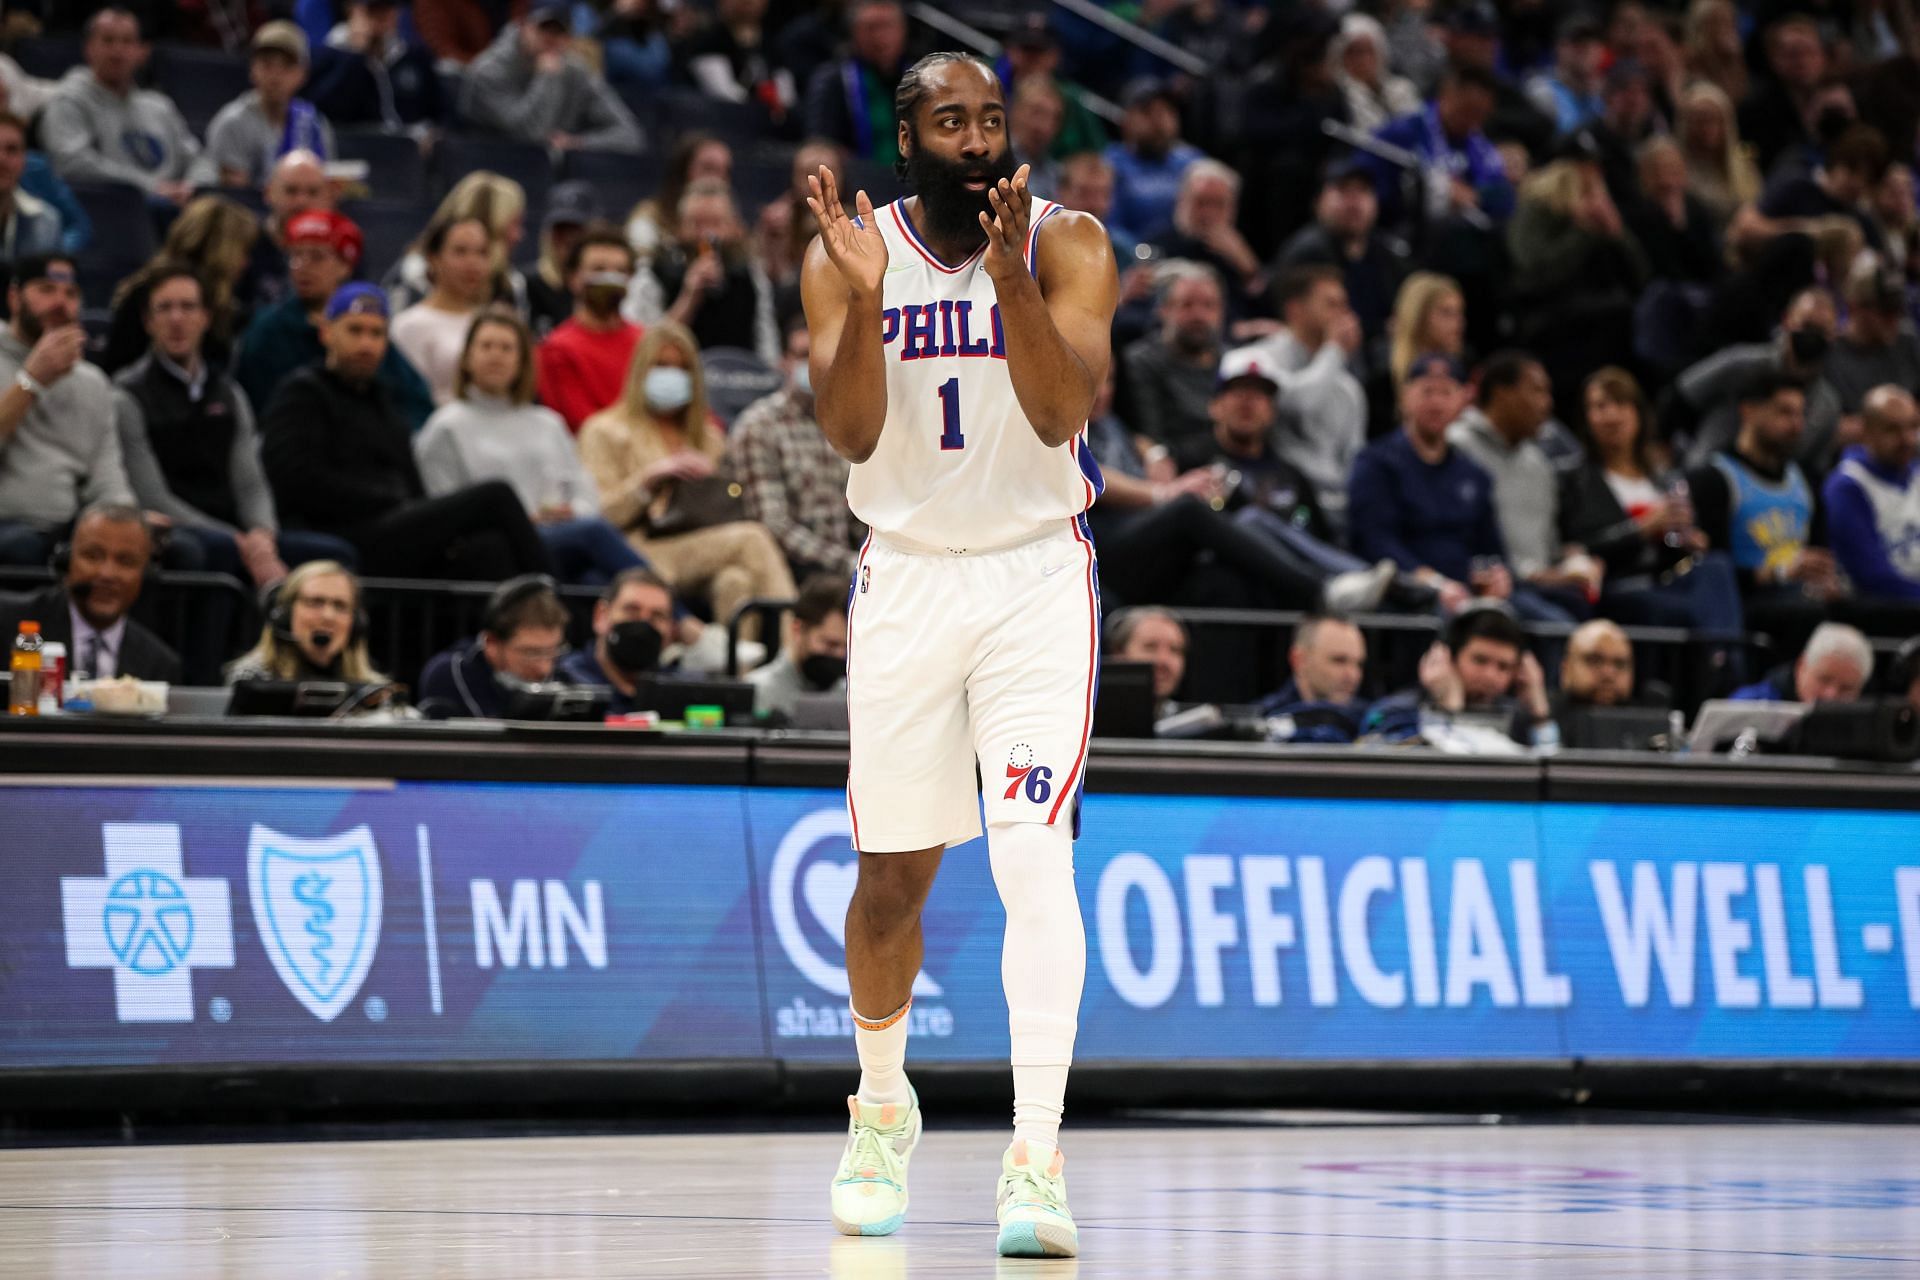 Philadelphia 76ers star James Harden is off to a strong start